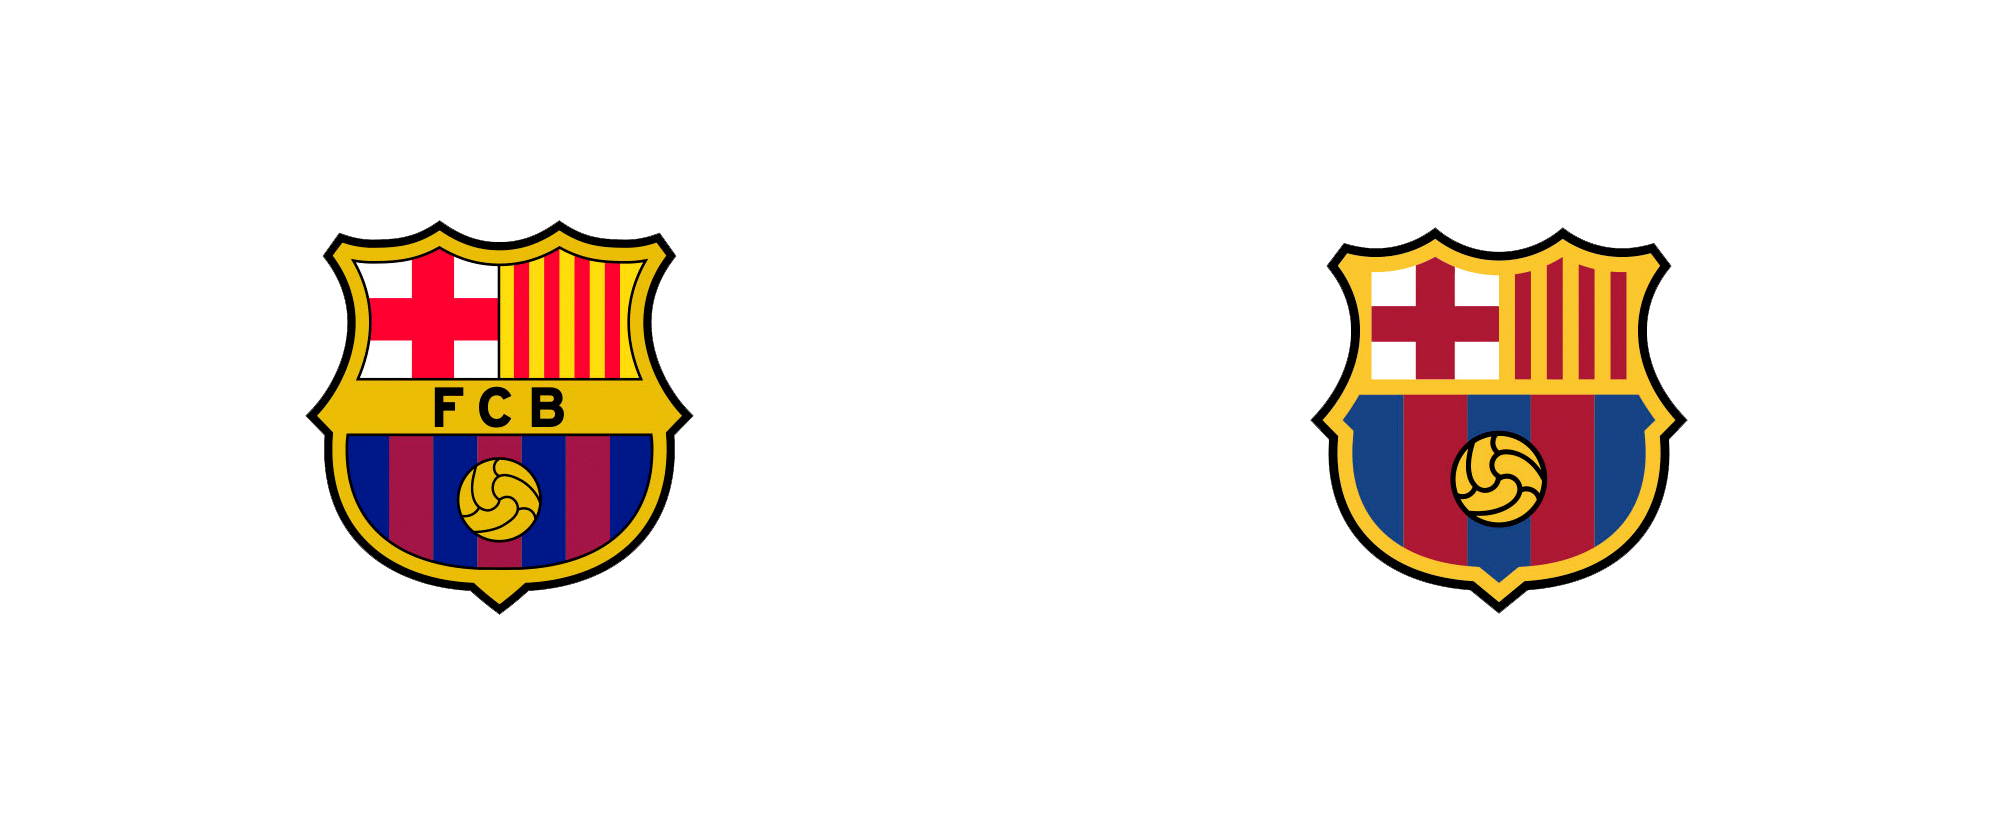 New Crest and Identity for FC Barcelona by Summa